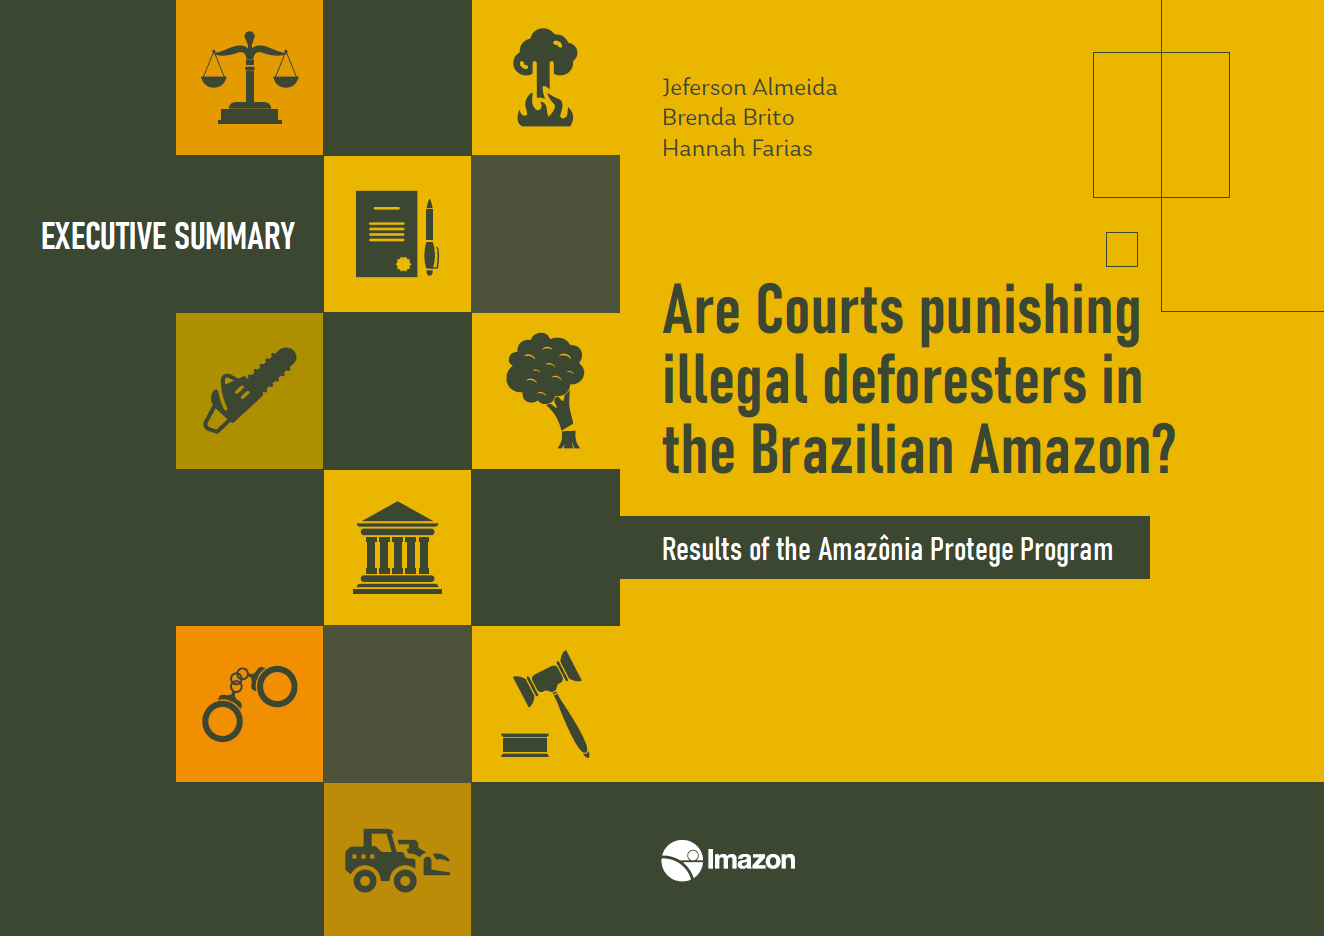 Capa Executive Summary Amazonia Protege - EXECUTIVE SUMMARY: Are Courts punishing illegal deforesters in the Brazilian Amazon? - Results of the Amazônia Protege Program